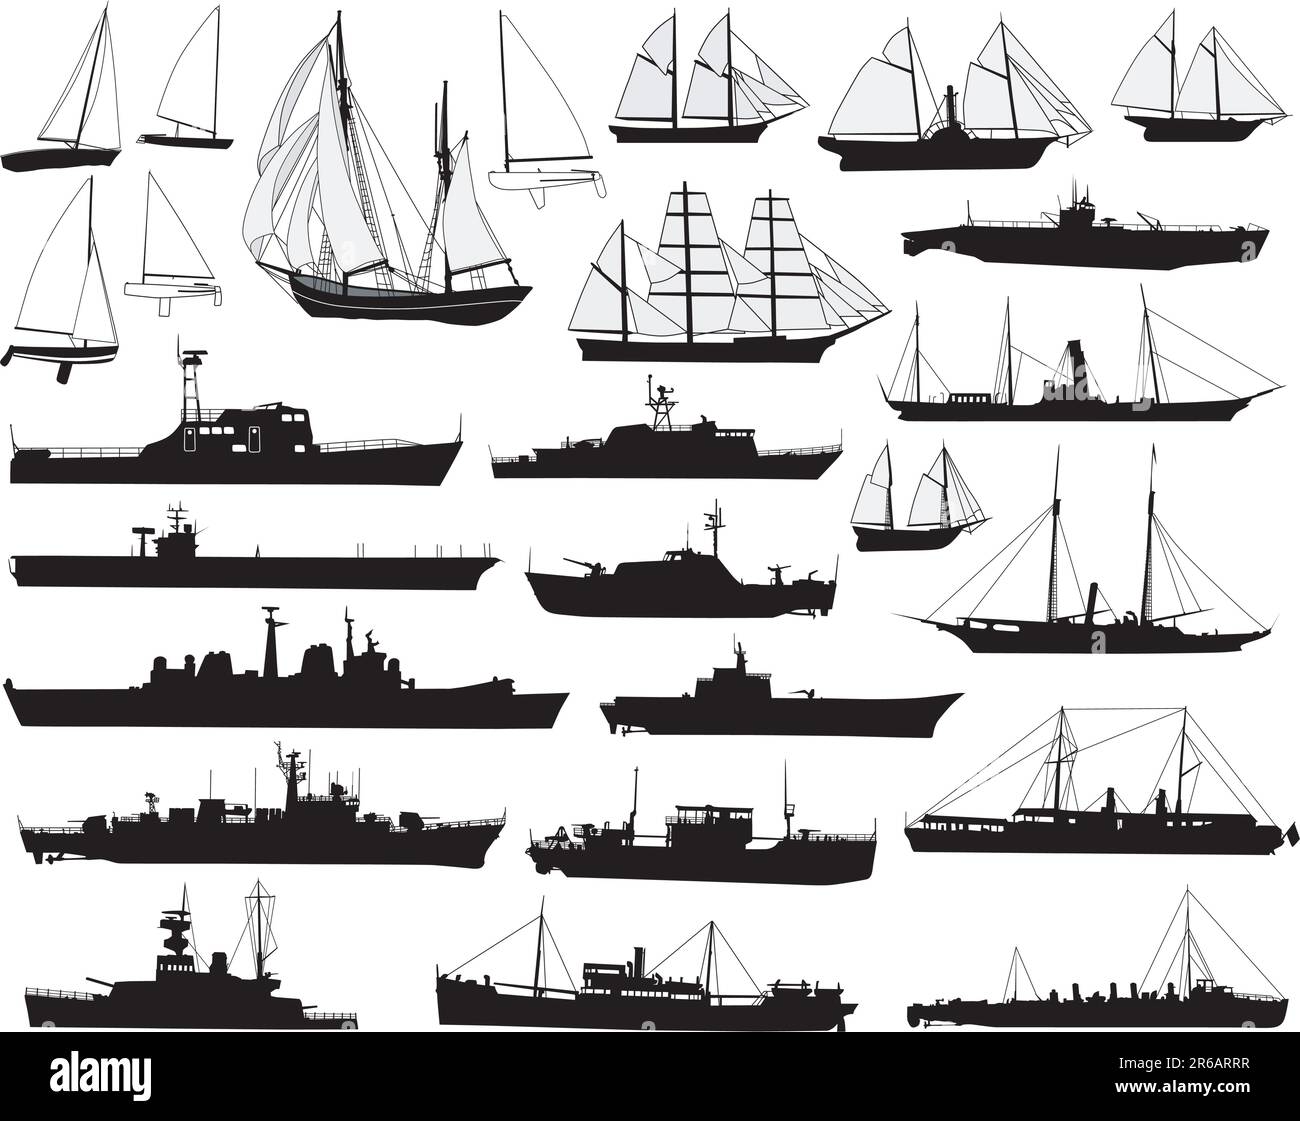 Collection of detailed vector boat and ship outlines Stock Vector